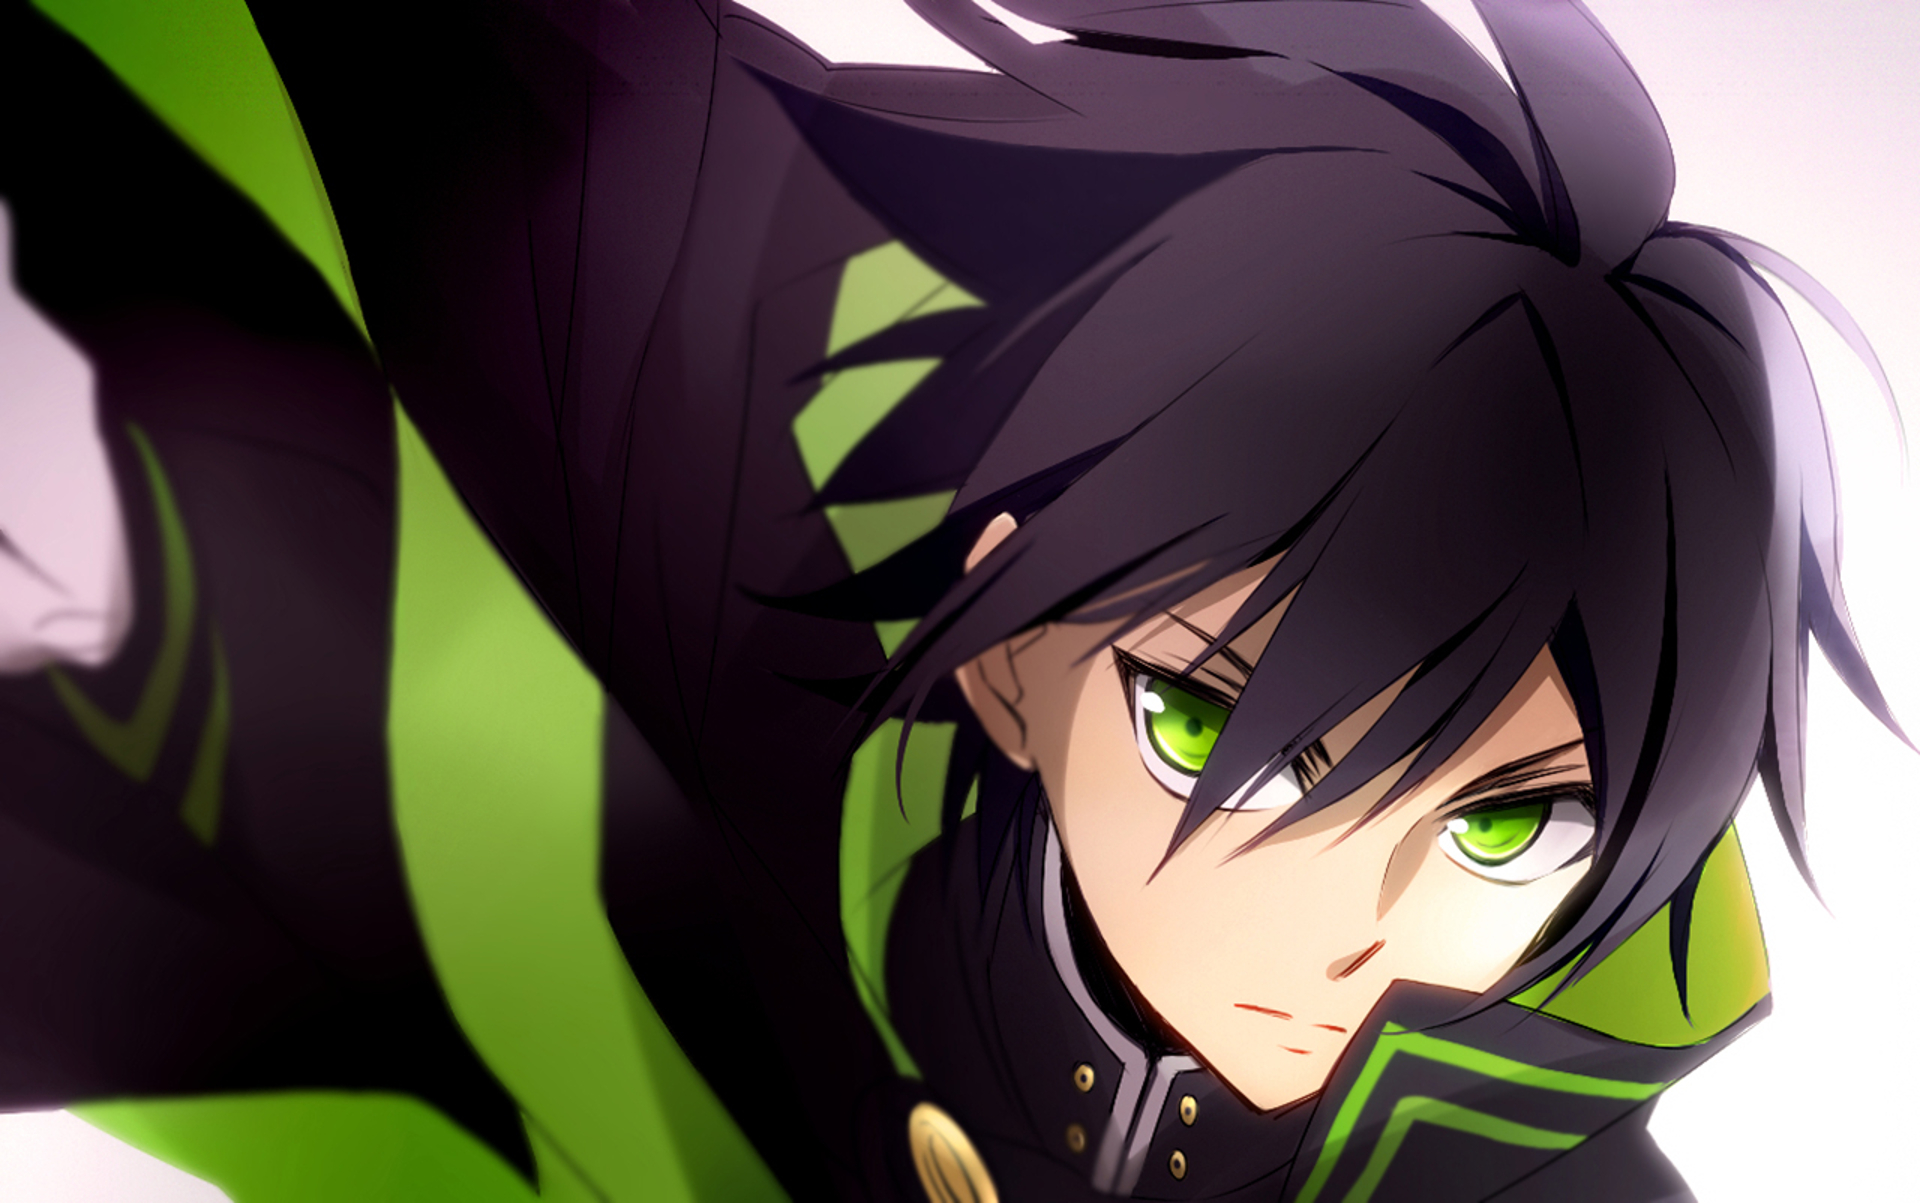 Anime Seraph of the End HD Wallpaper by usamorin